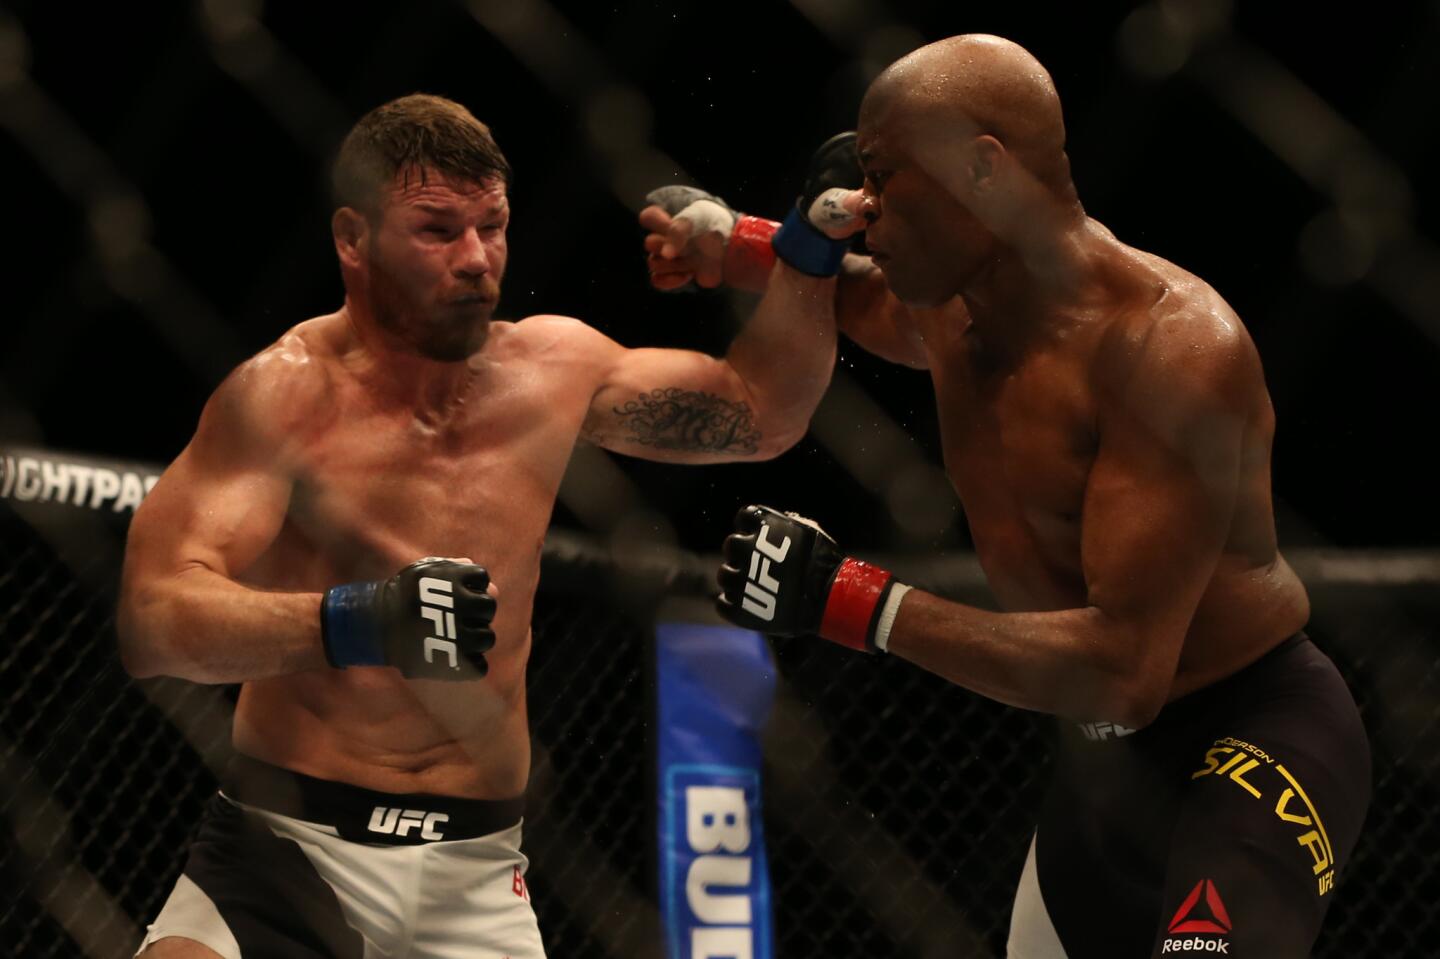 Brazil's Anderson Silva (R) and Great Britain's Michael Bisping (L) in action.